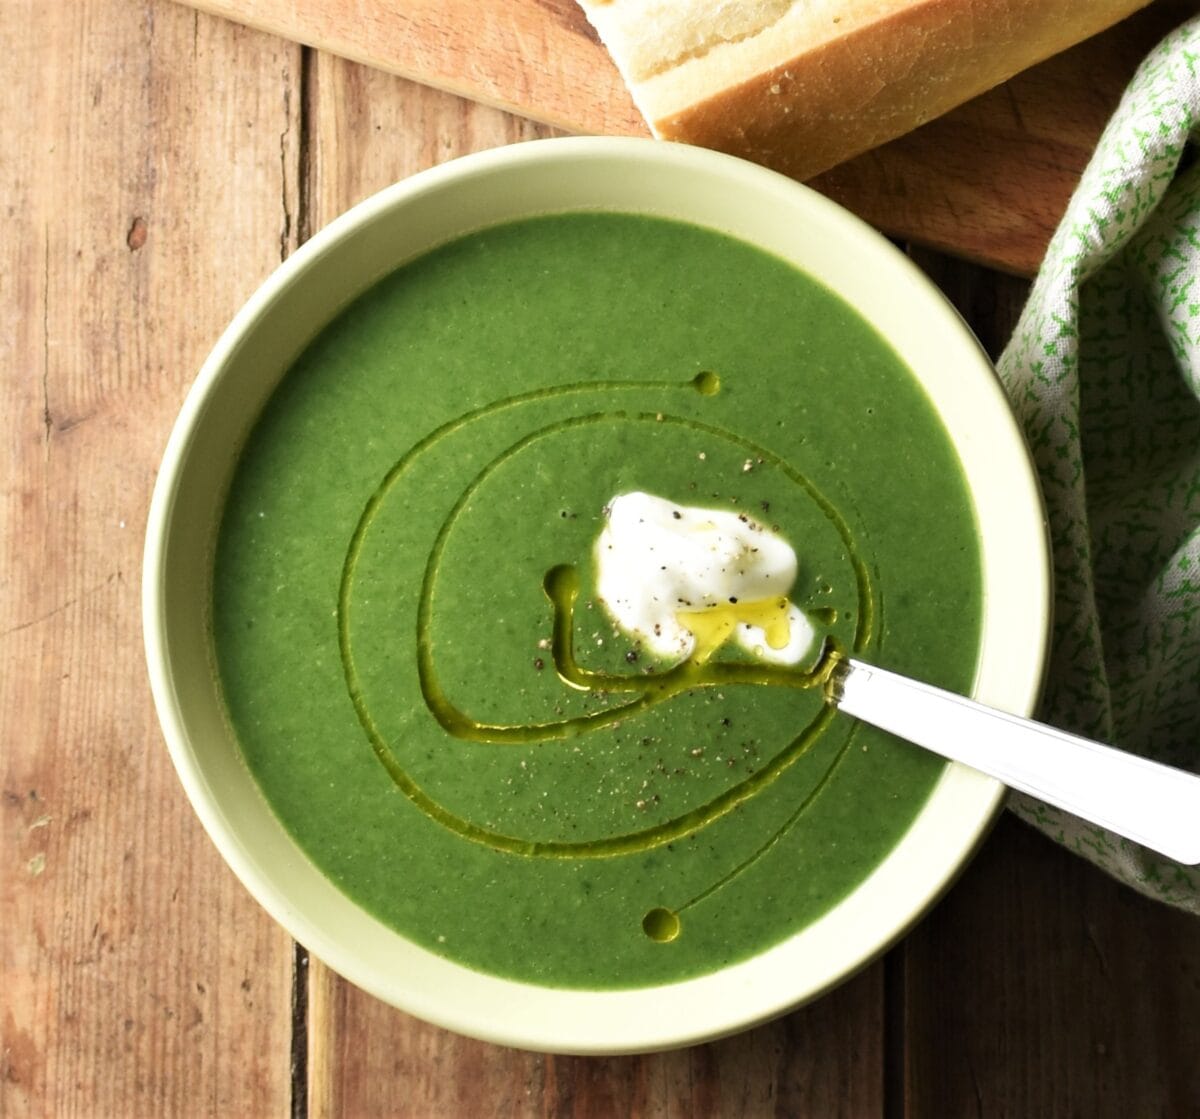 Cream of spinach soup in green bowl with spoon, baguette and green cloth in background.